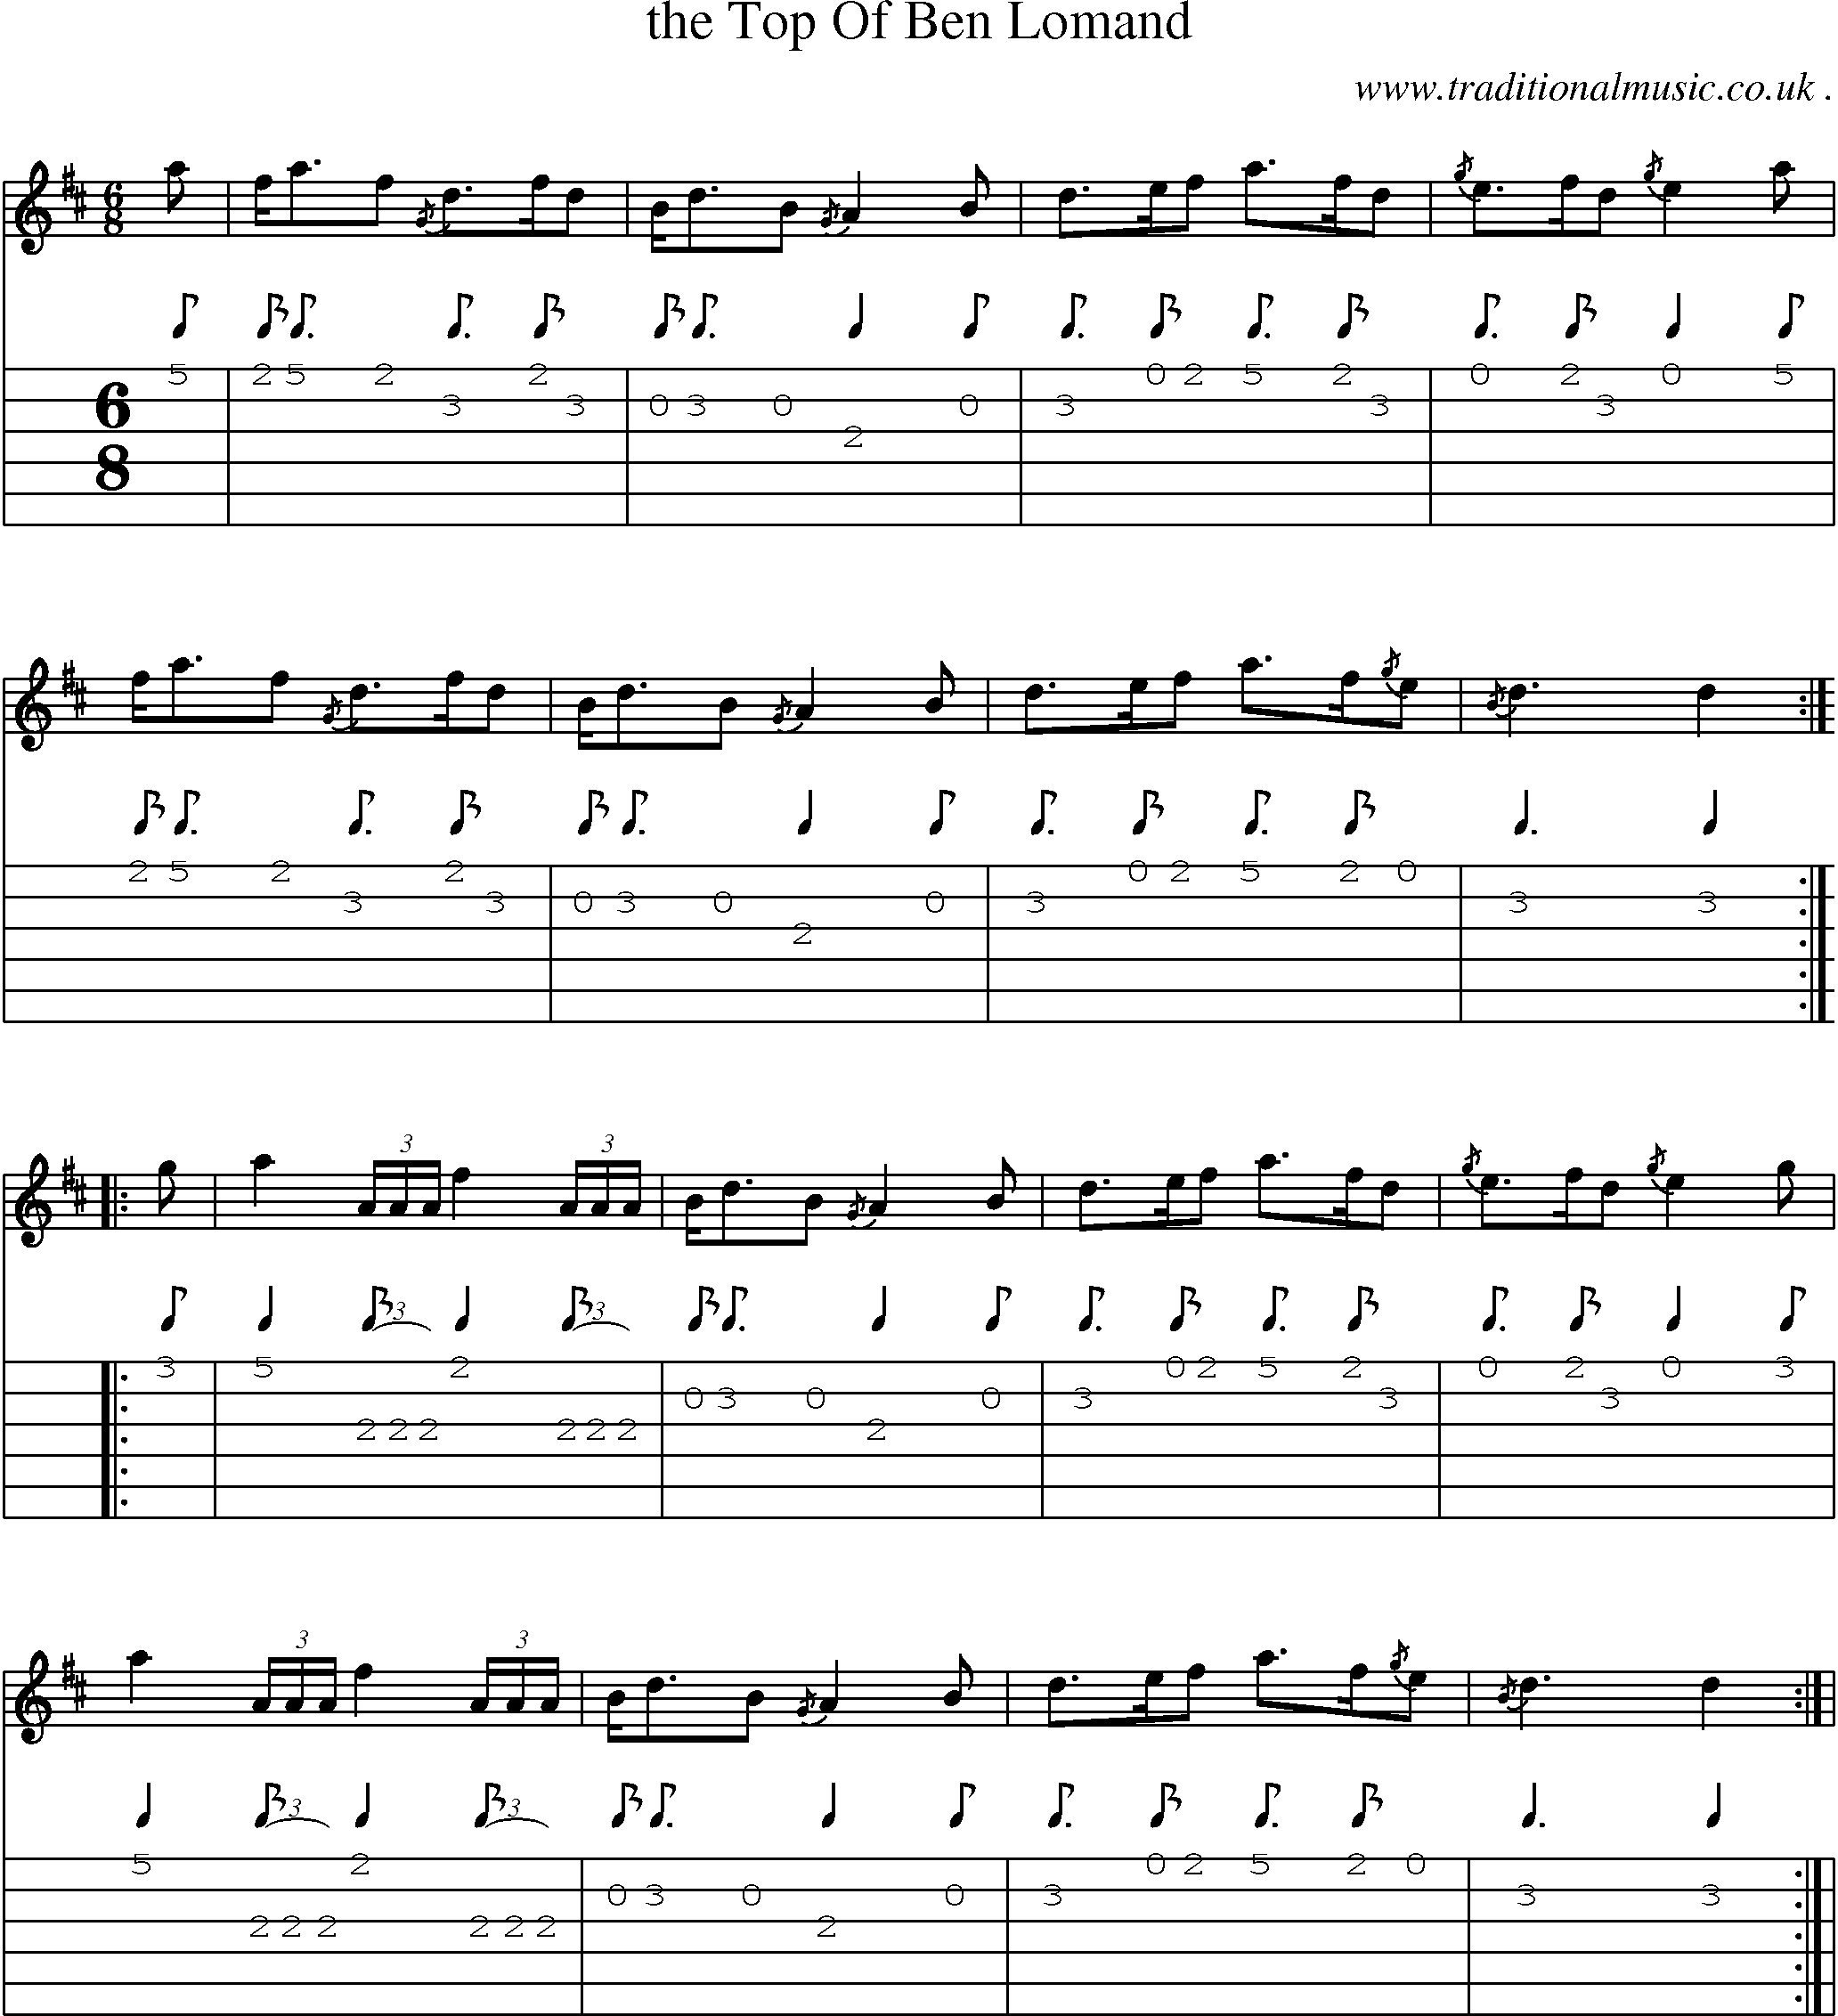 Sheet-music  score, Chords and Guitar Tabs for The Top Of Ben Lomand